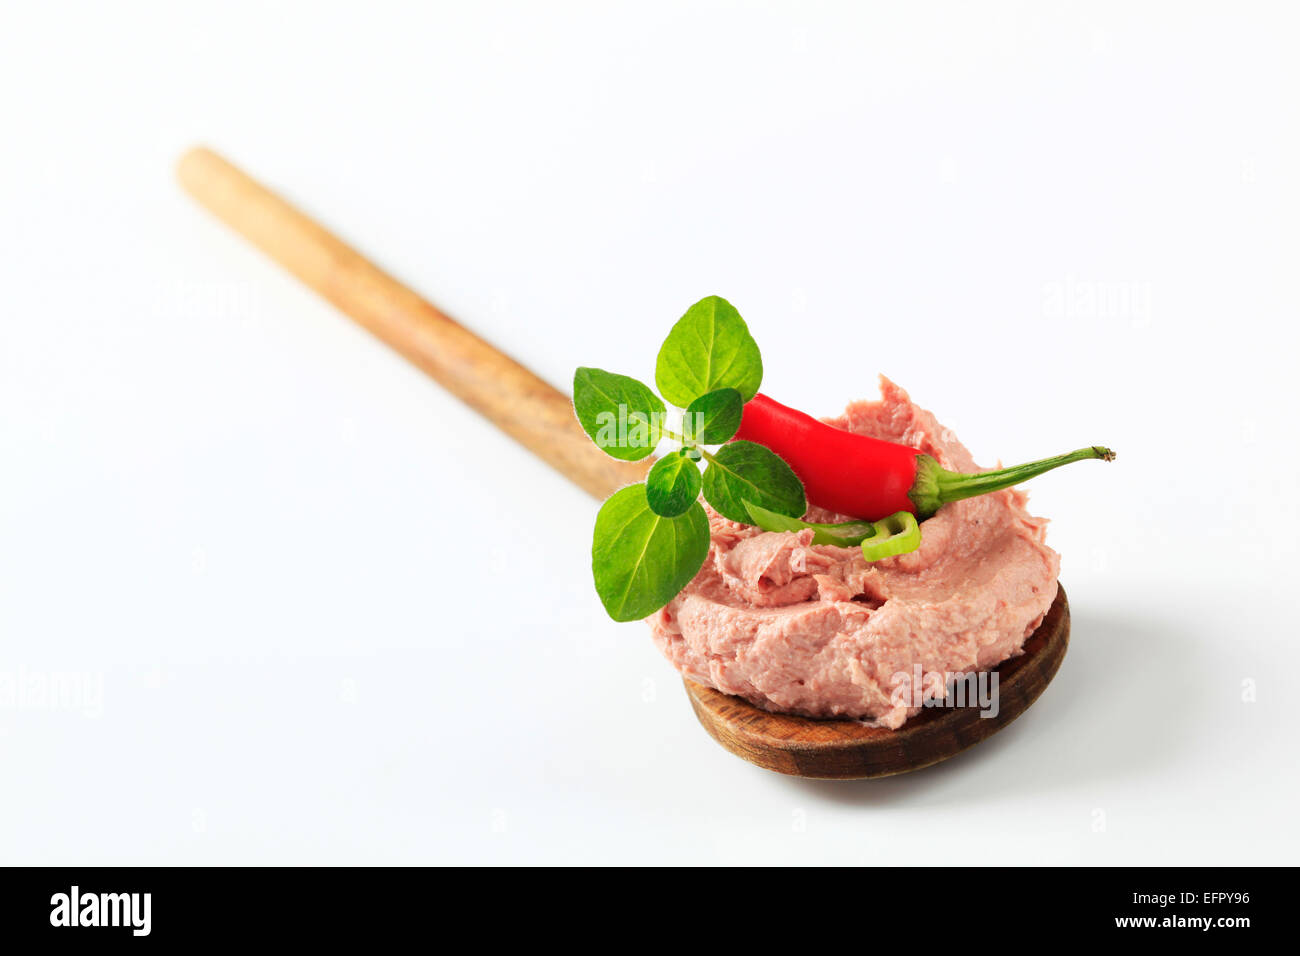 Liver pate on a wooden spoon - studio Stock Photo